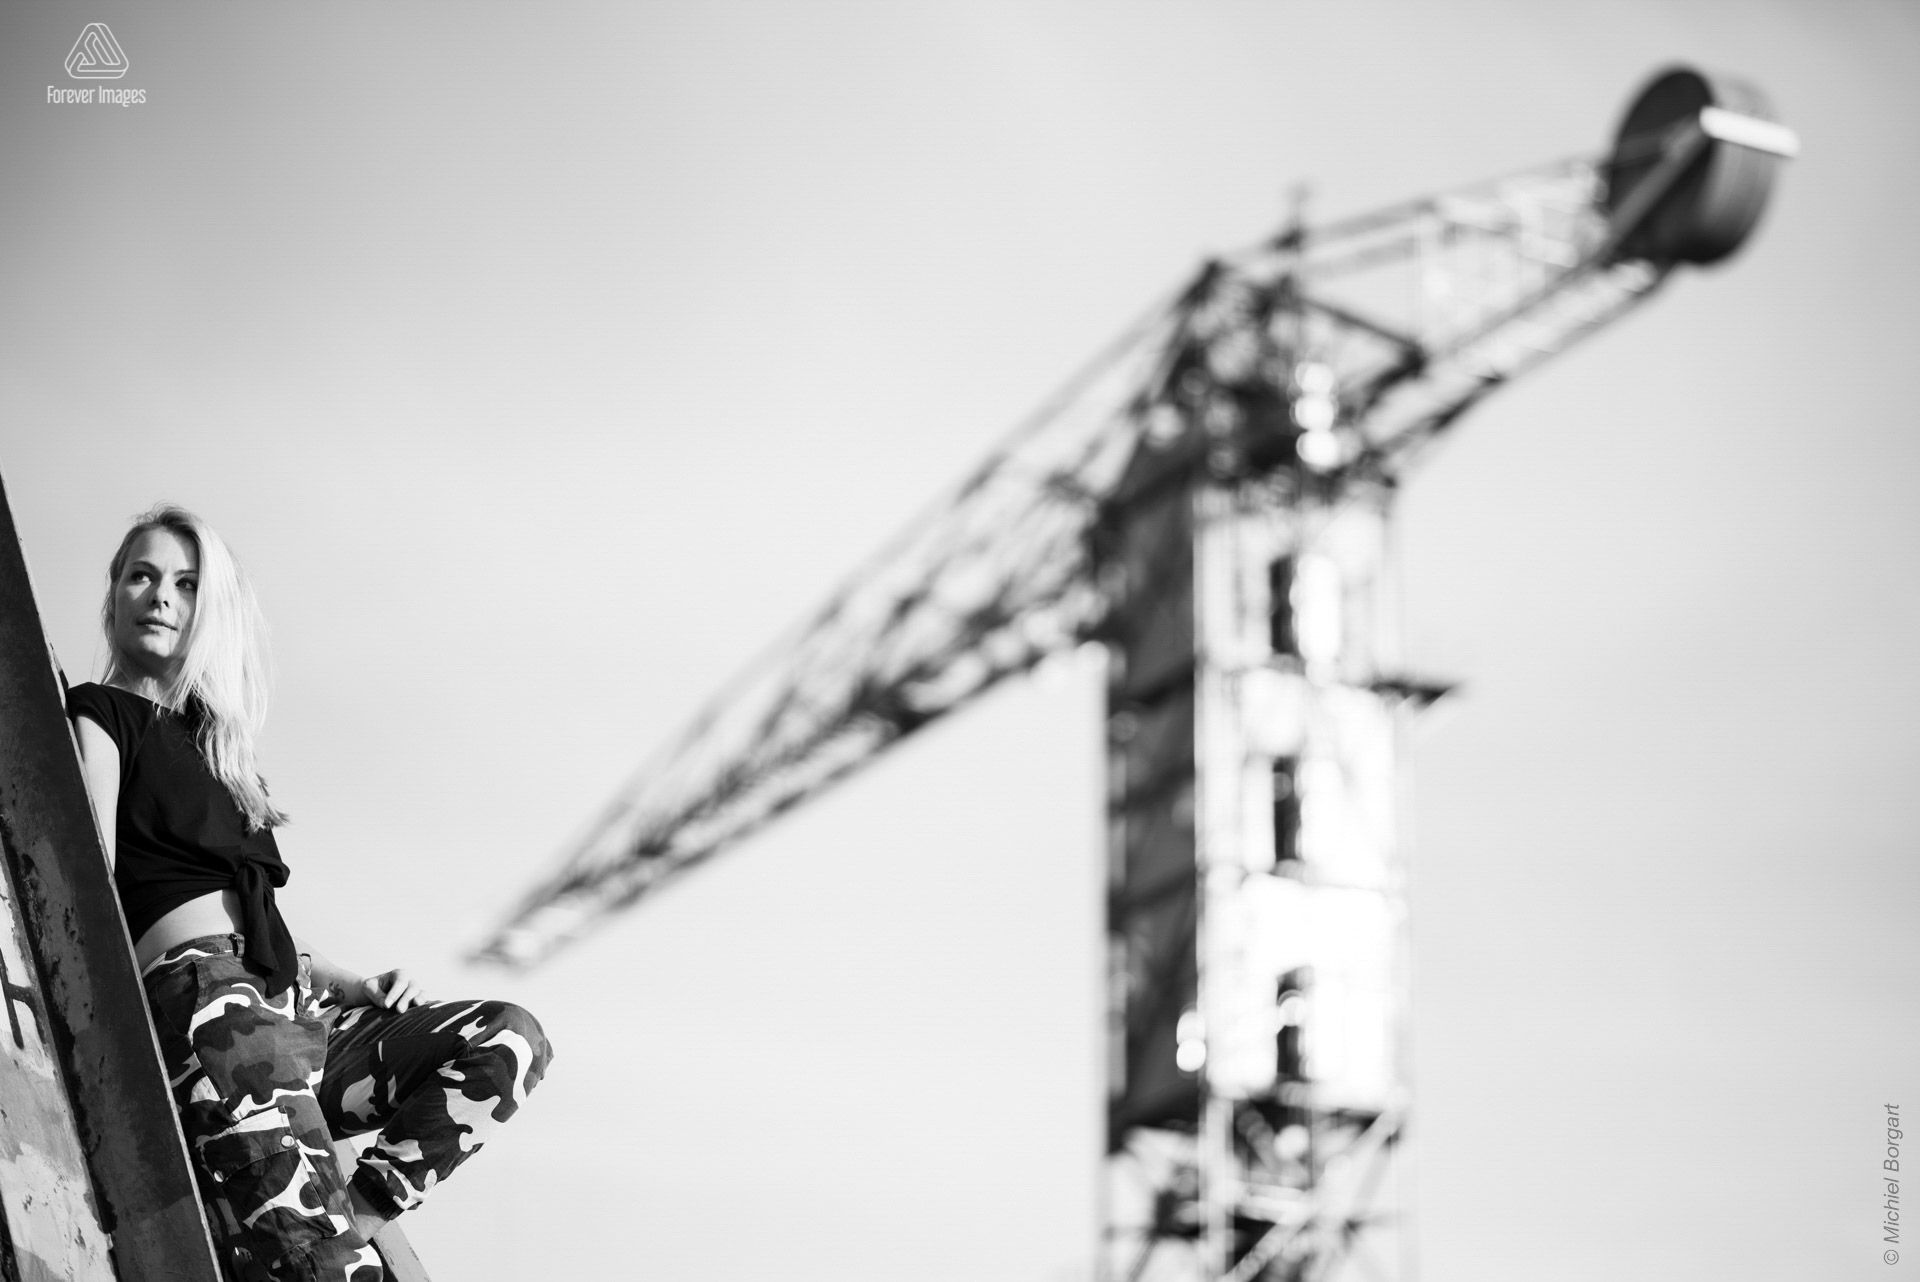 Portrait photo black and white B&W lady on steel construction with crane | Heleen Muchachabiker NDSM Werf | Portrait Photographer Michiel Borgart - Forever Images.